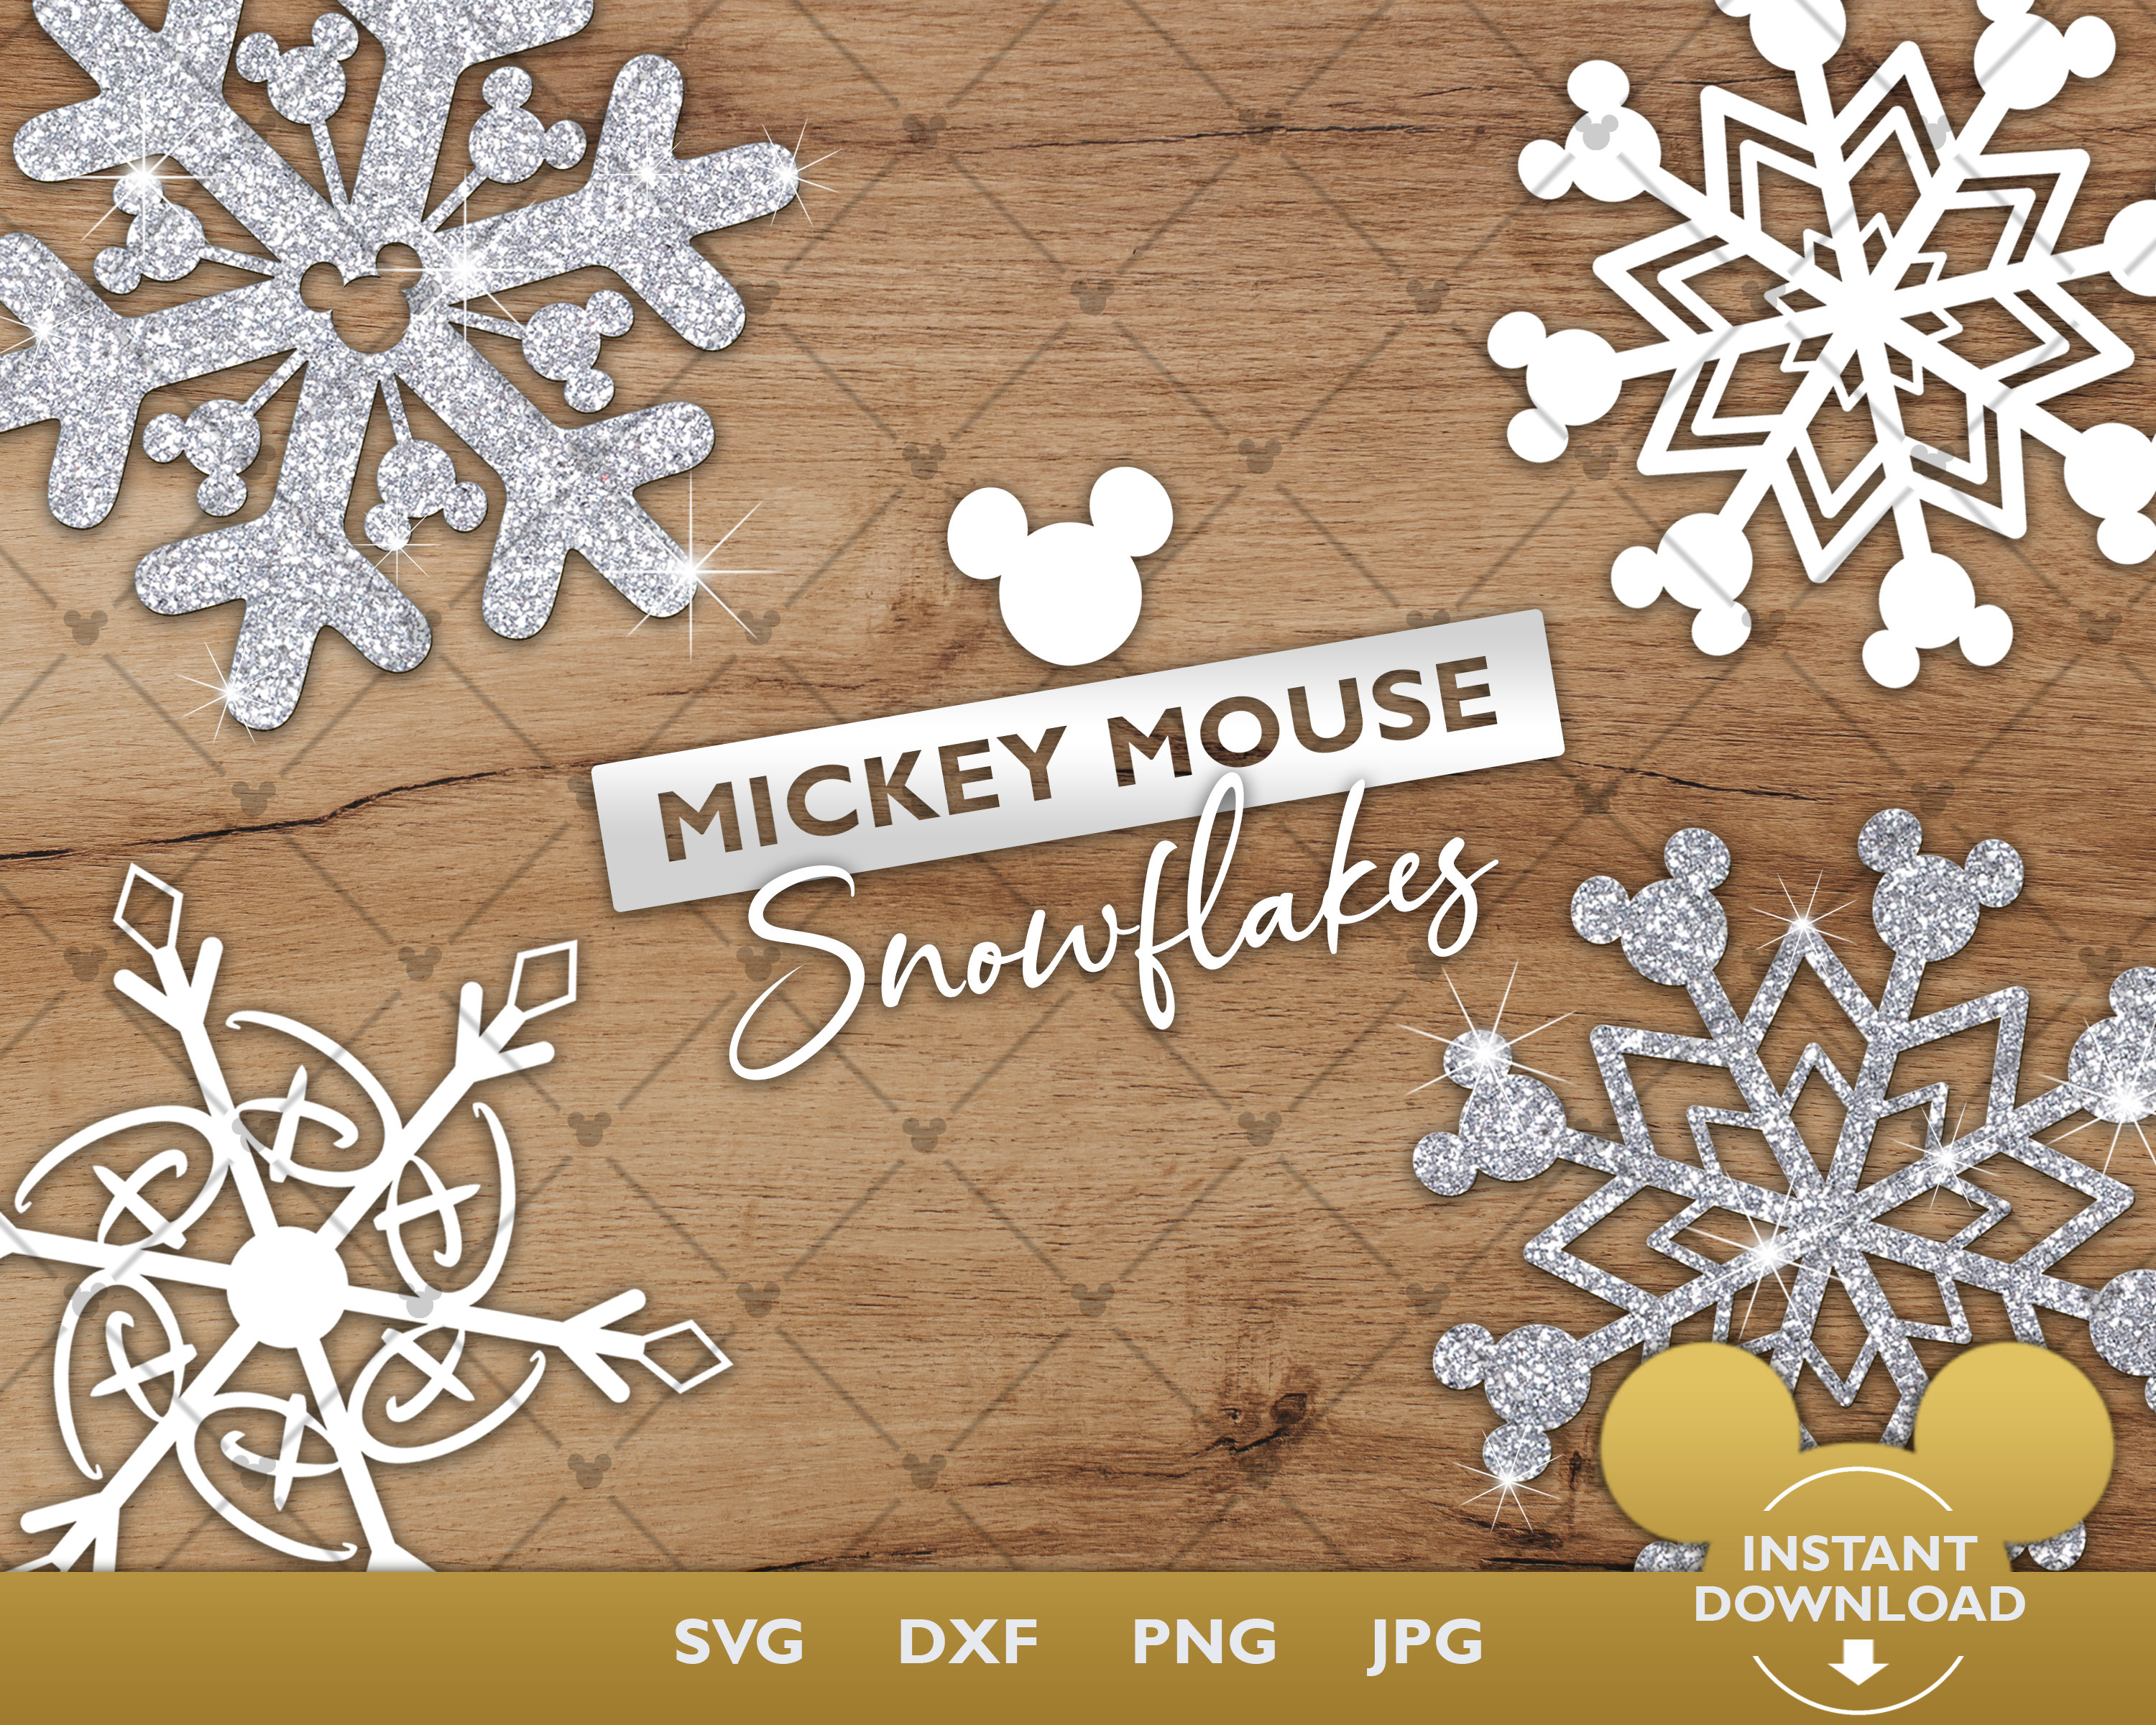 Download Mickey Mouse Snowflake SVG Disney Christmas Decorations | Etsy